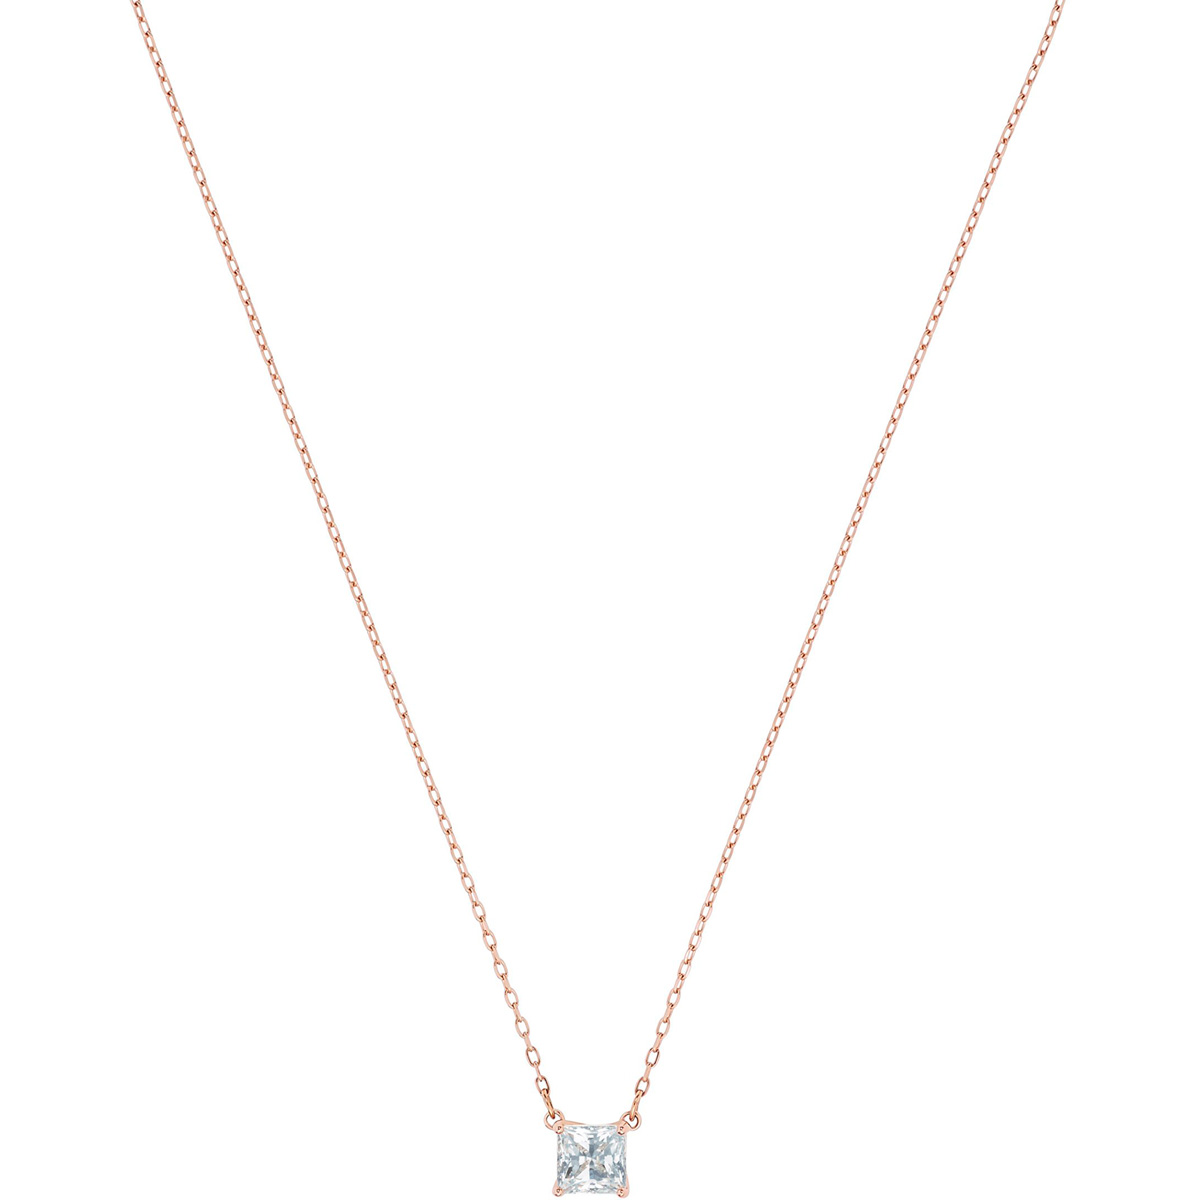 Photos - Pendant / Choker Necklace Swarovski Attract Necklace - White with Rose Gold Plating 